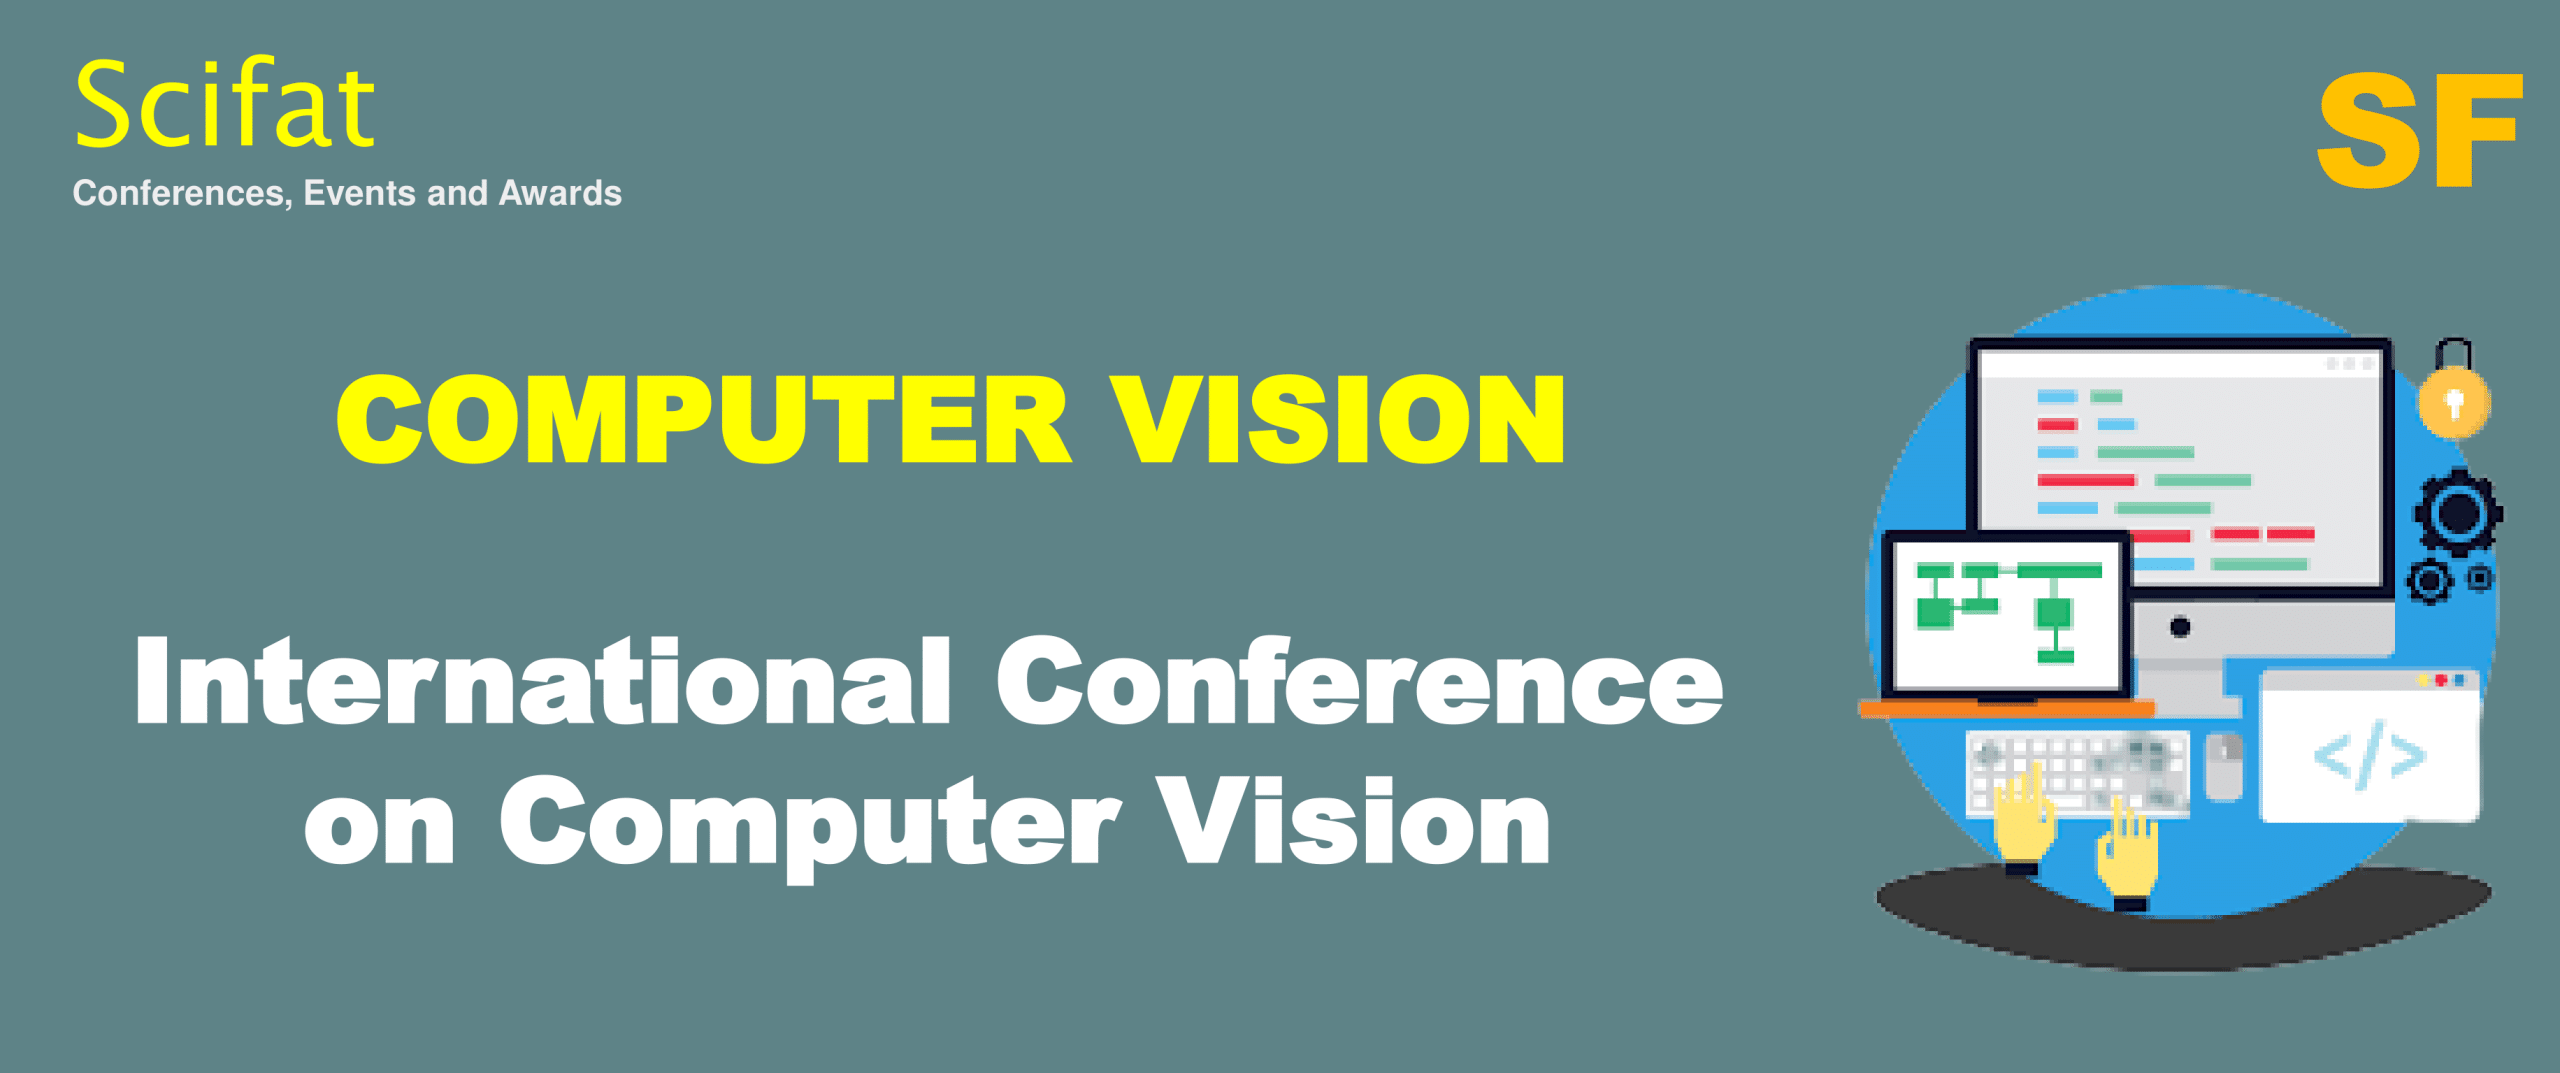 13th Edition of International Conference on Computer Vision